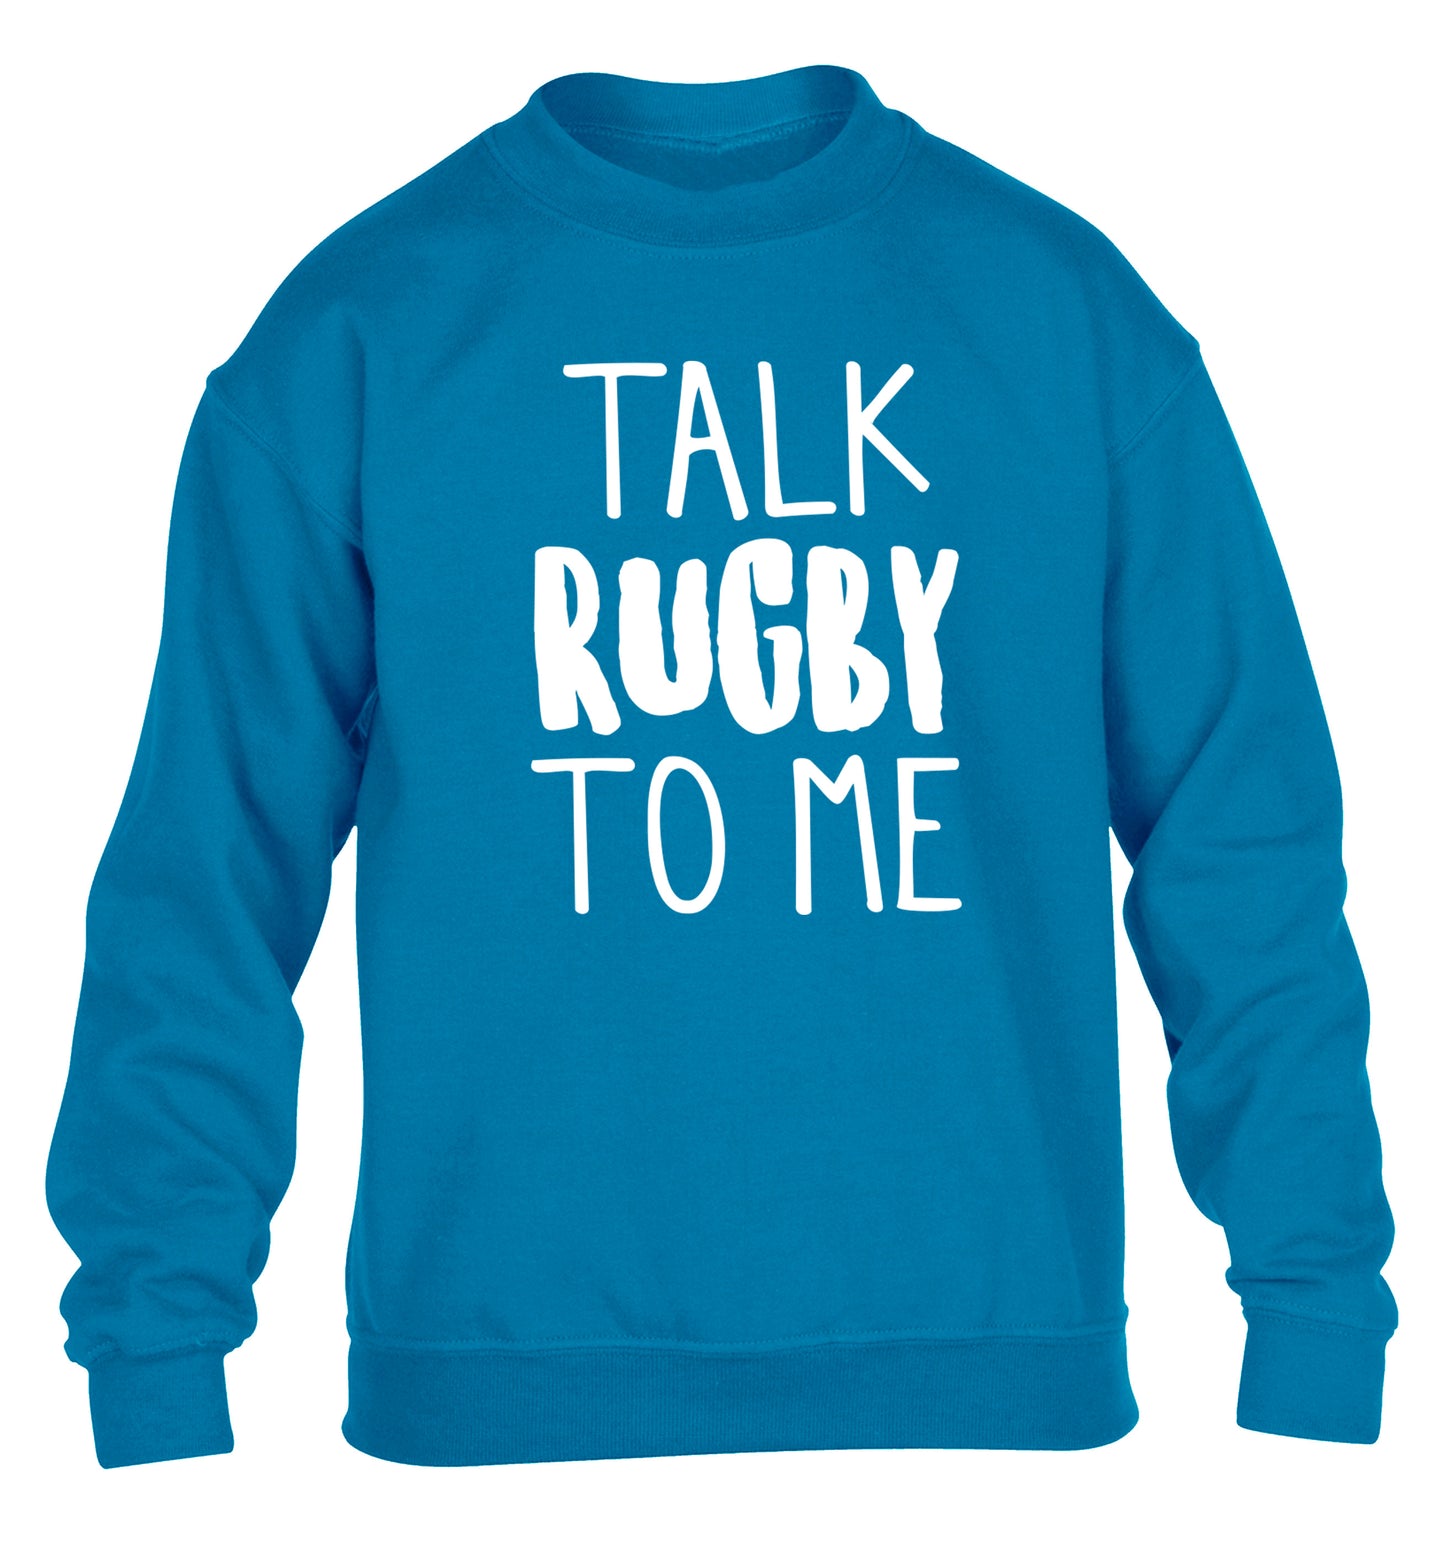 Talk rugby to me children's blue sweater 12-13 Years